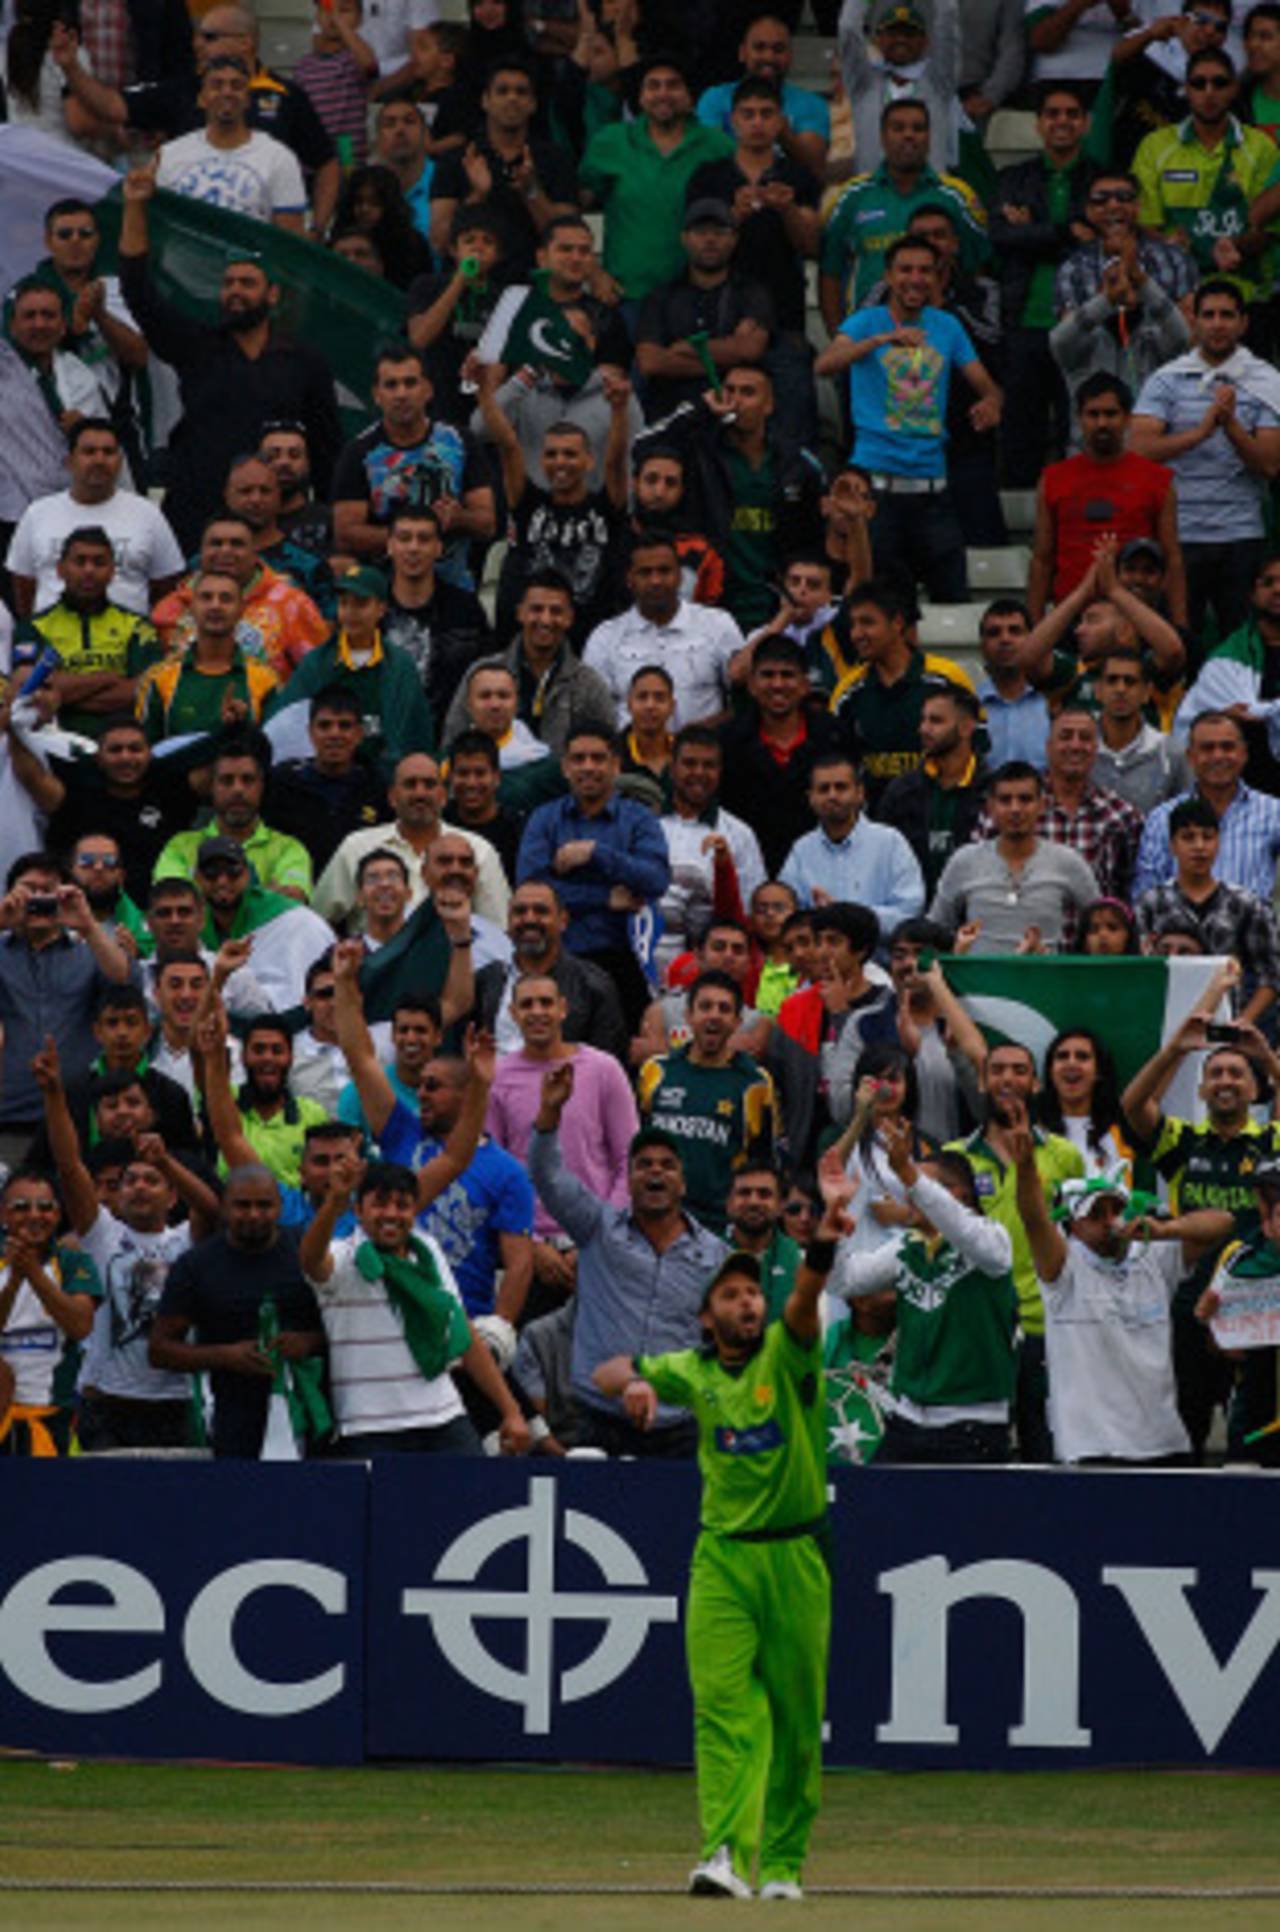 Pakistan had plenty of support at Edgbaston, which made for good ticket sales&nbsp;&nbsp;&bull;&nbsp;&nbsp;Getty Images